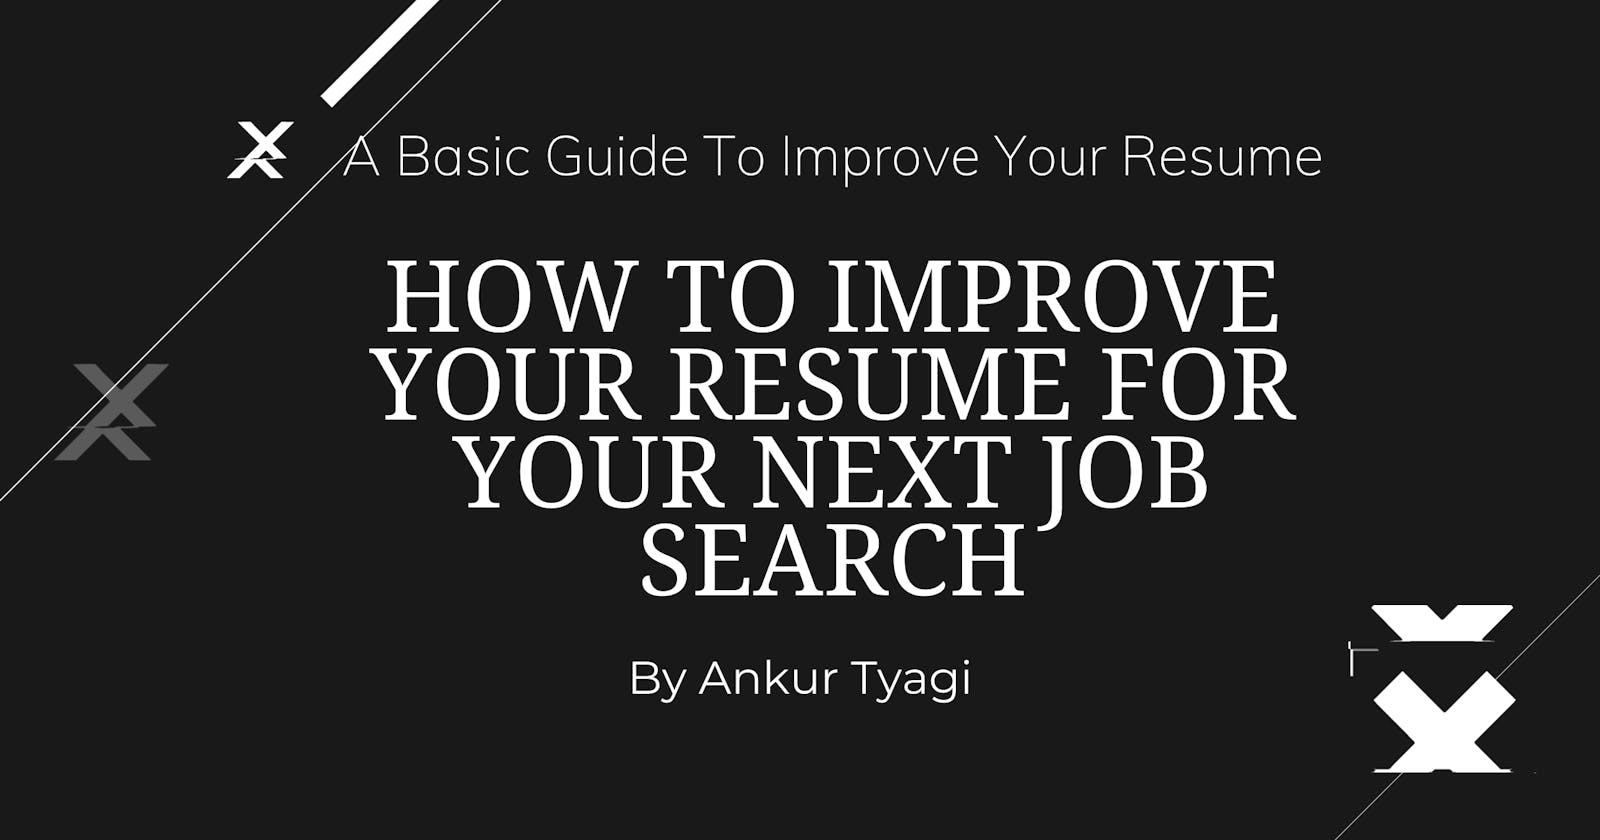 How to Improve Your Resume For Your Next Job Search!